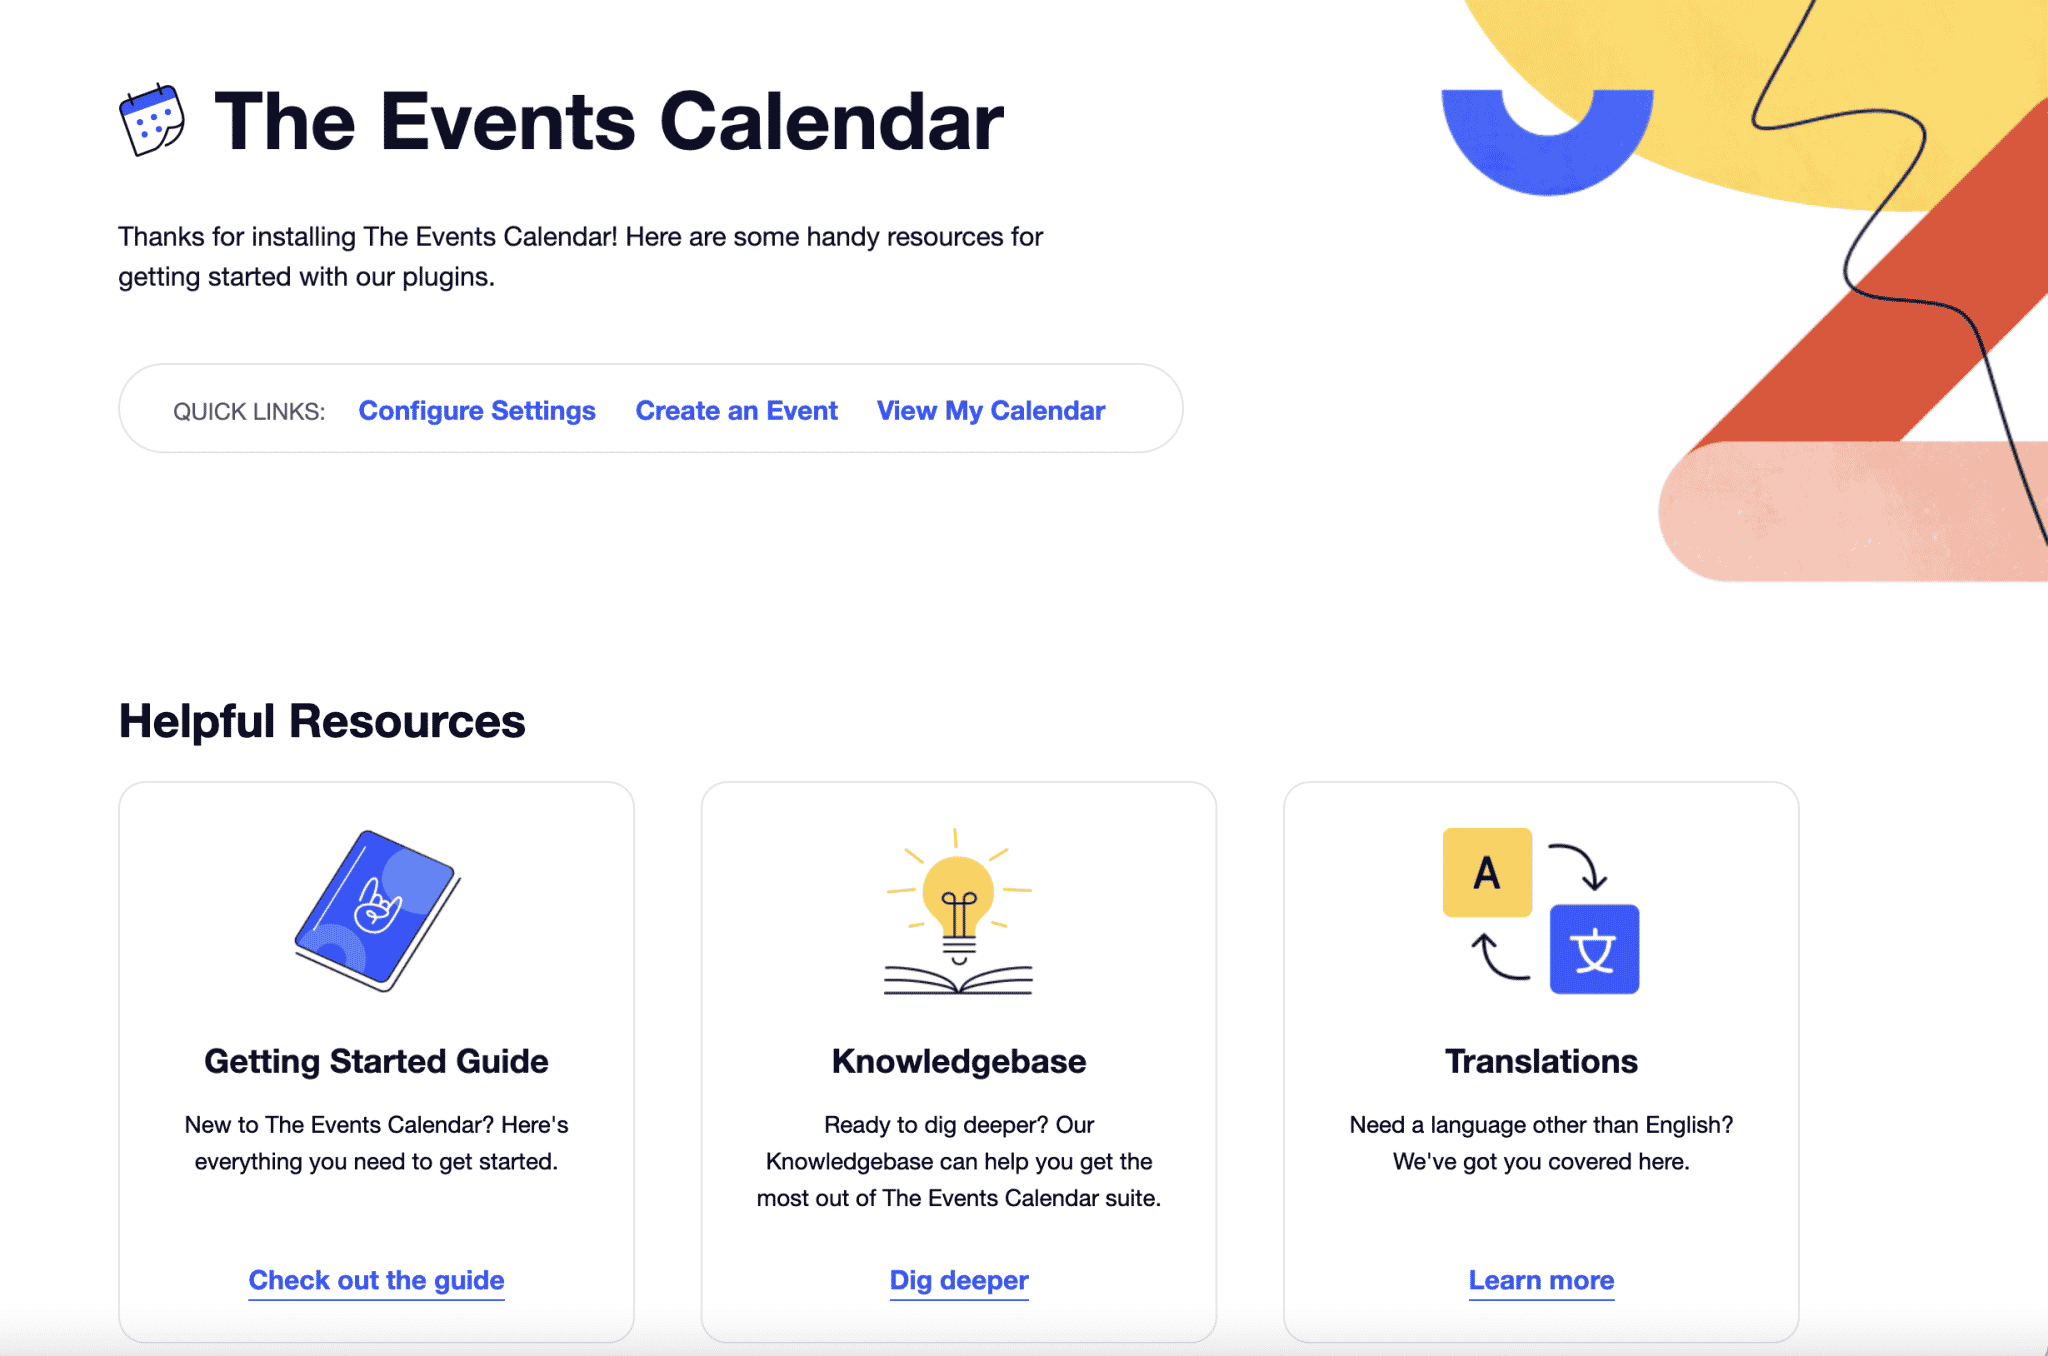 The Events Calendar plugin offers useful resources after download. 